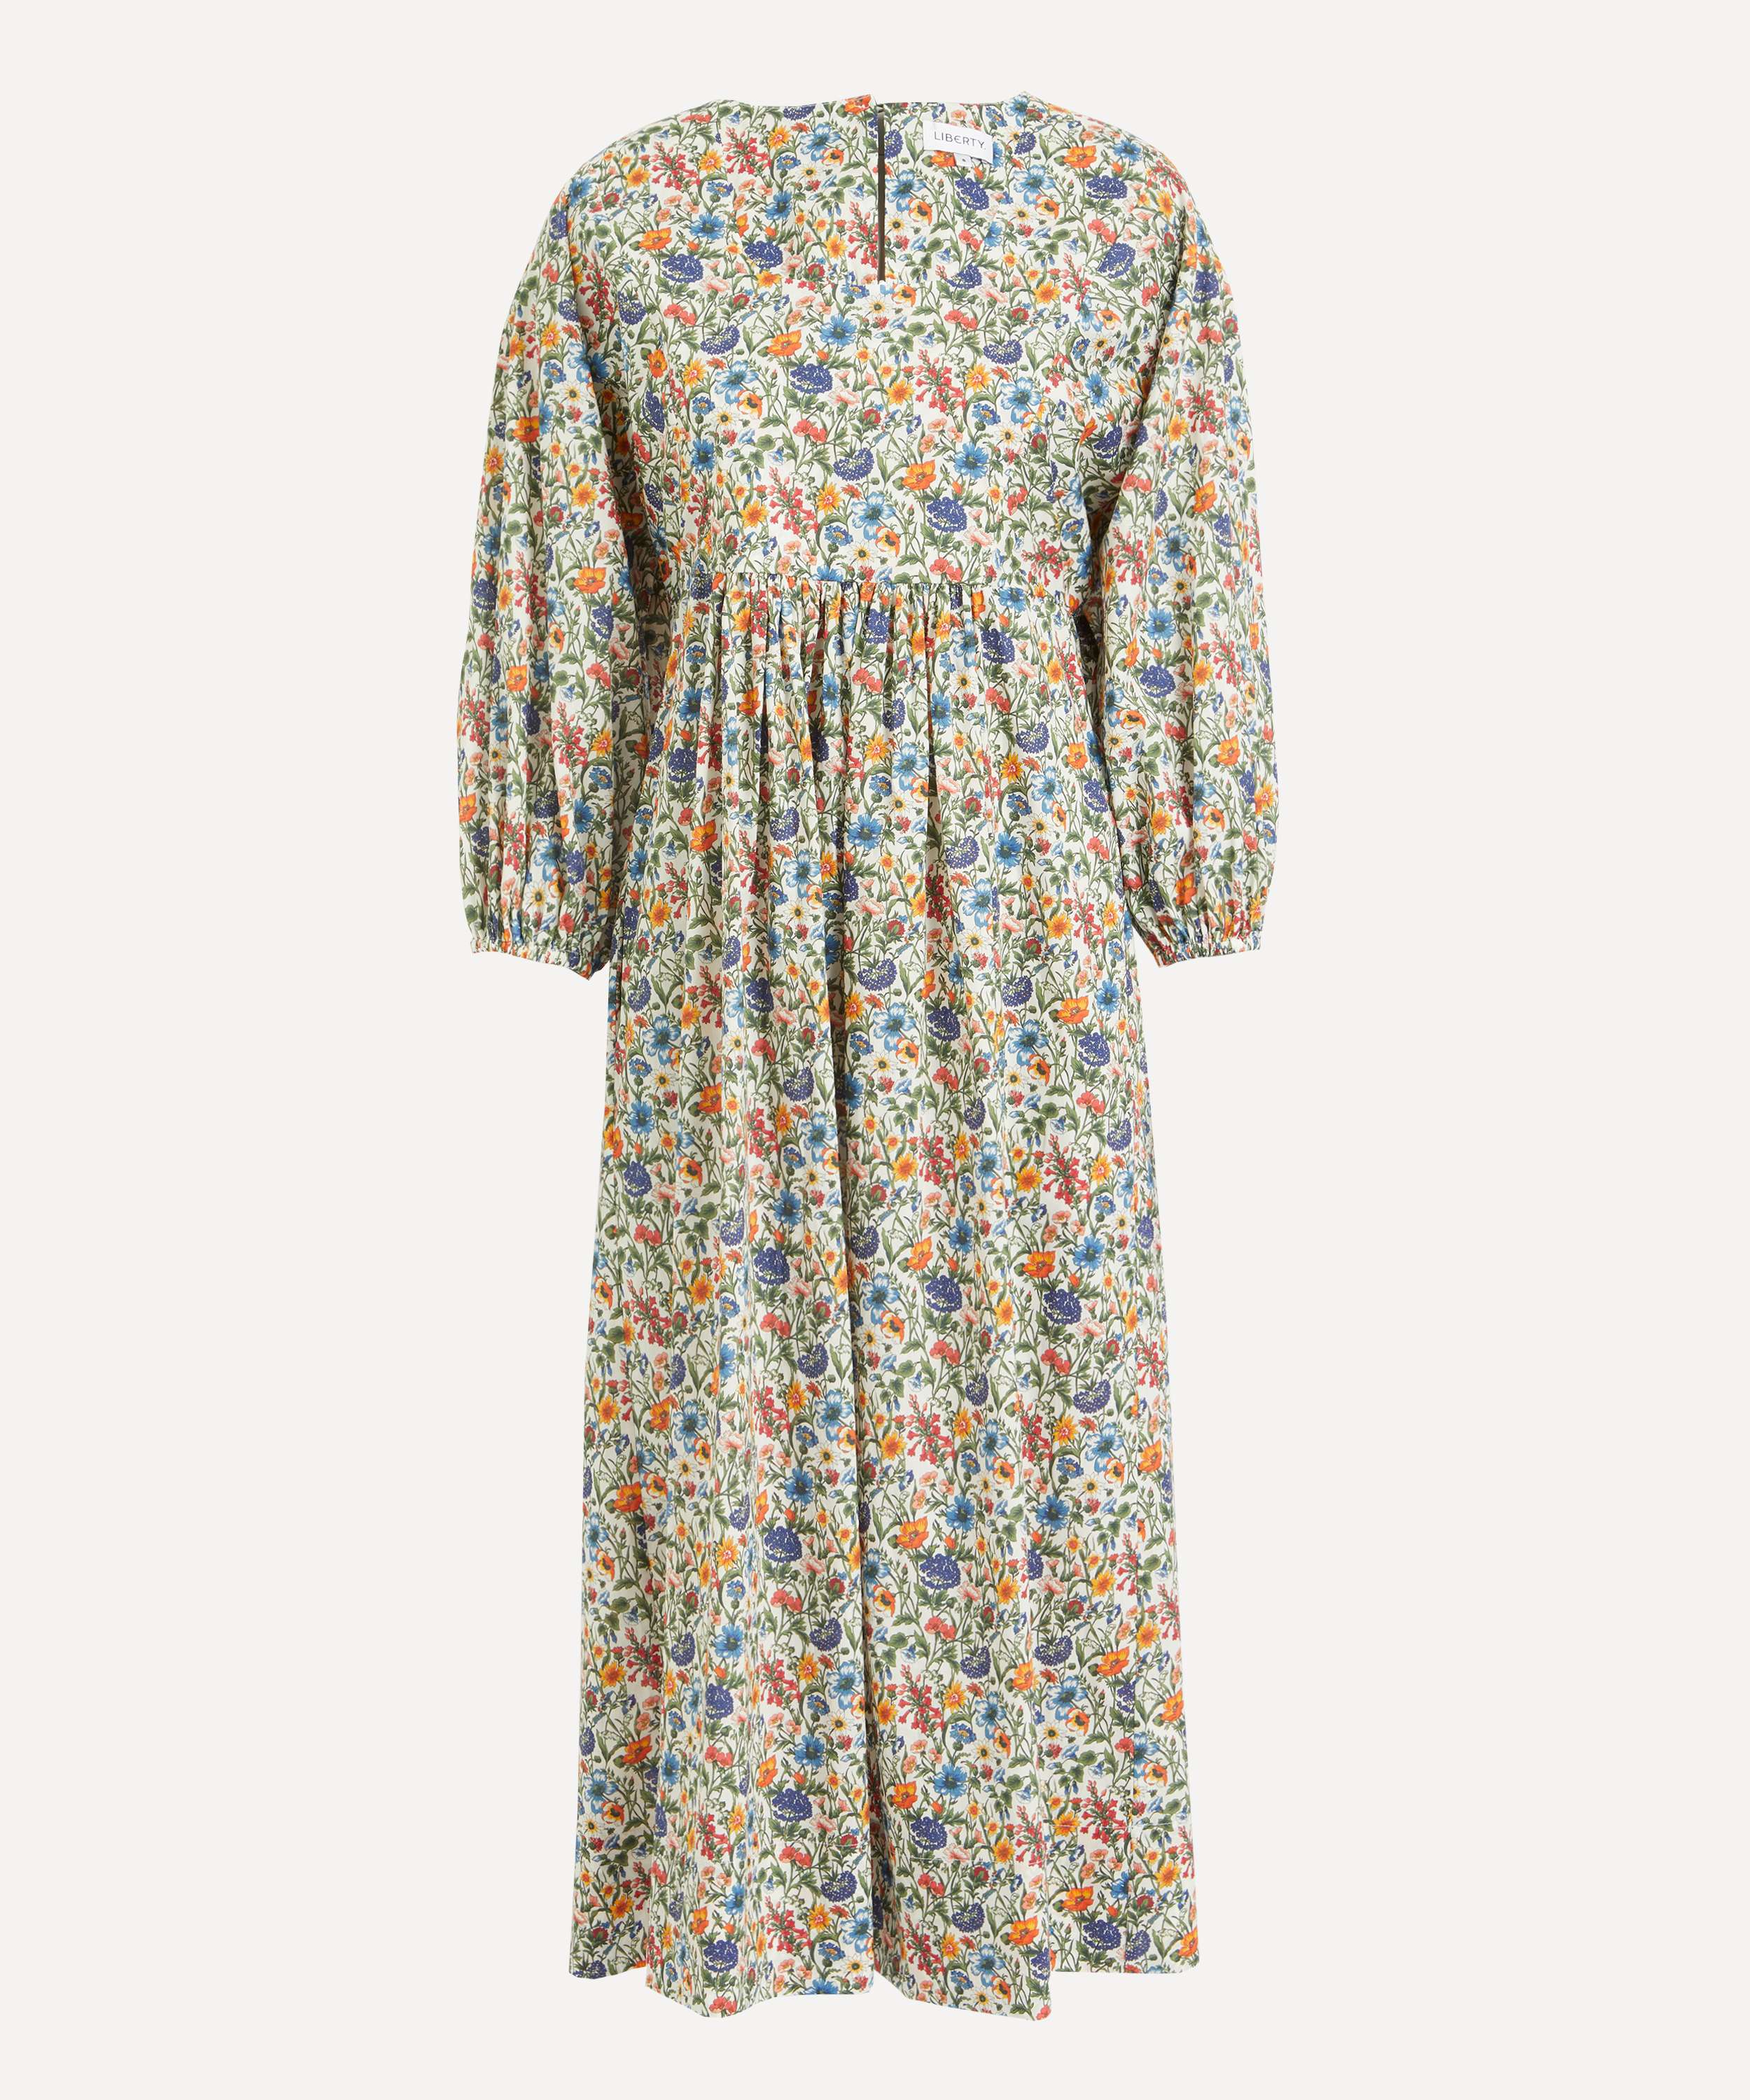 Liberty Print Dresses for Every Occasion